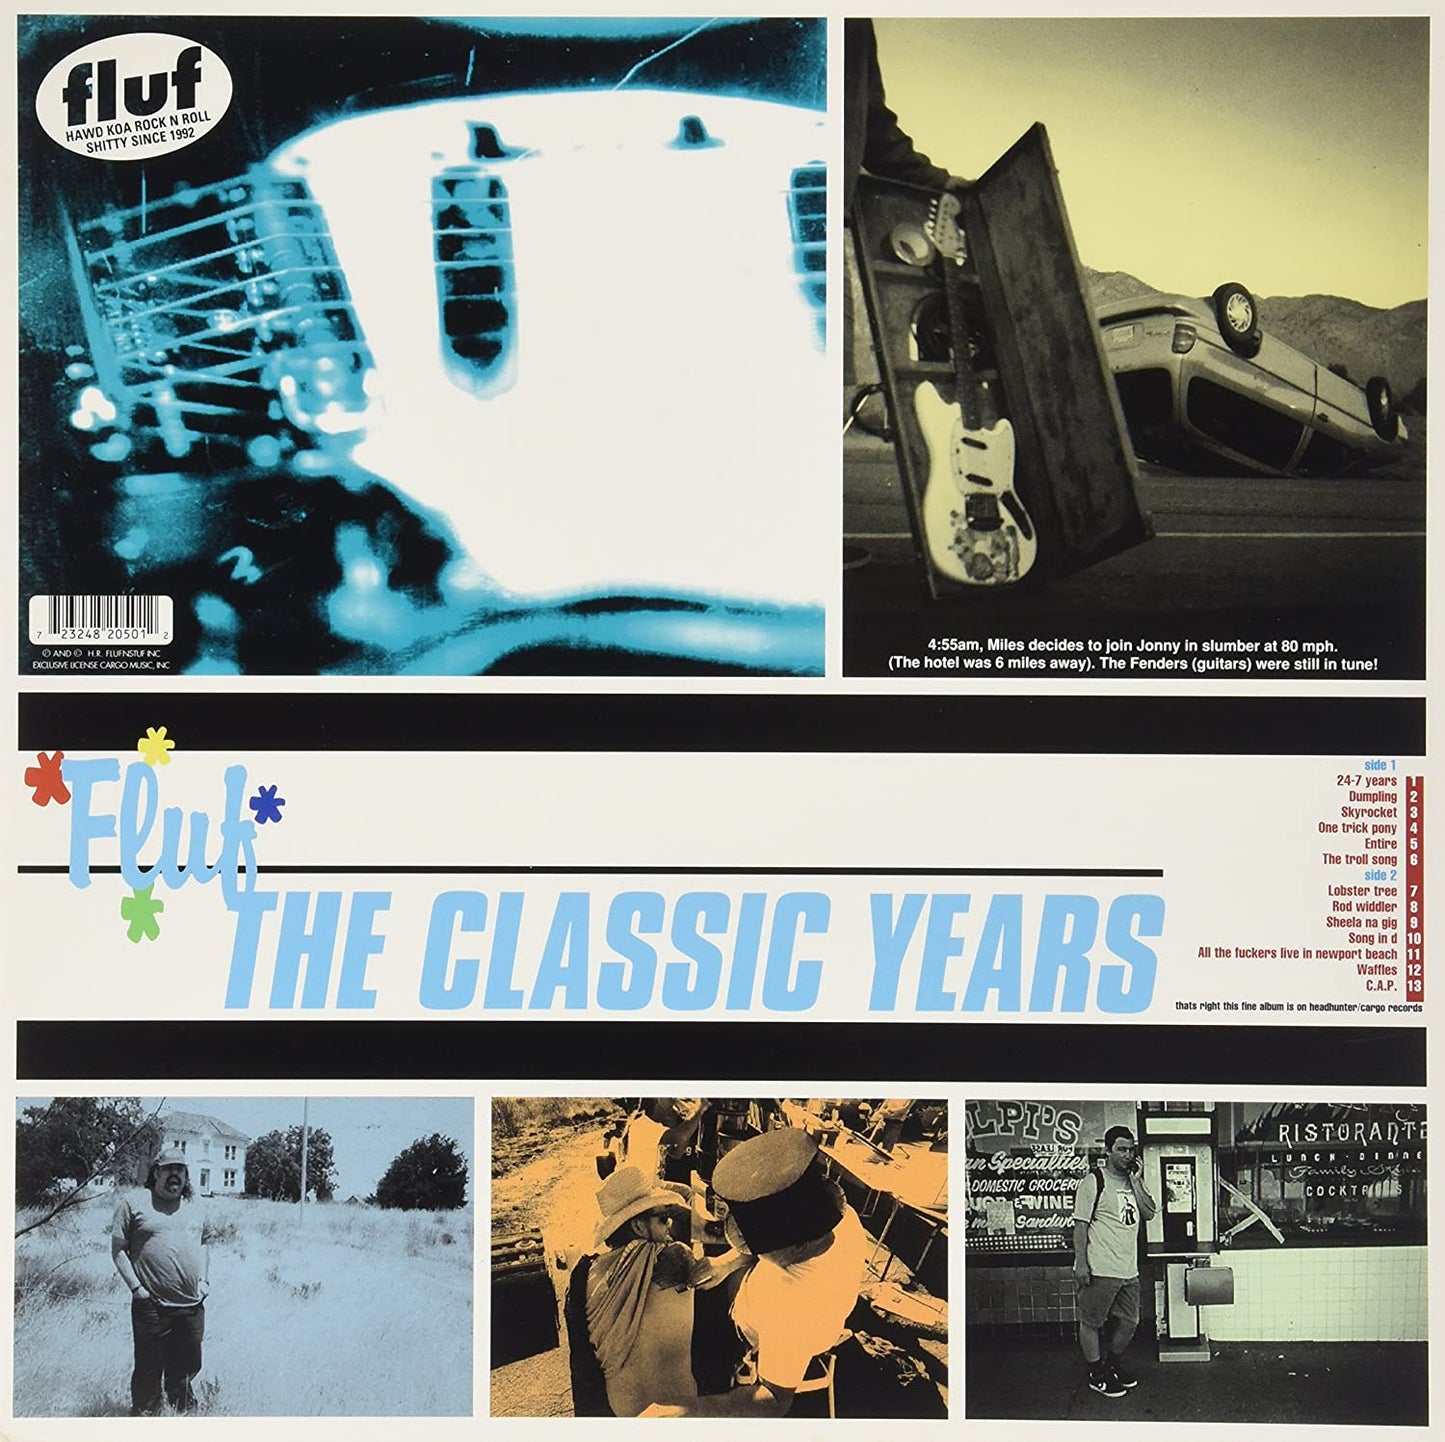 Fluf "The Classic Years" LP